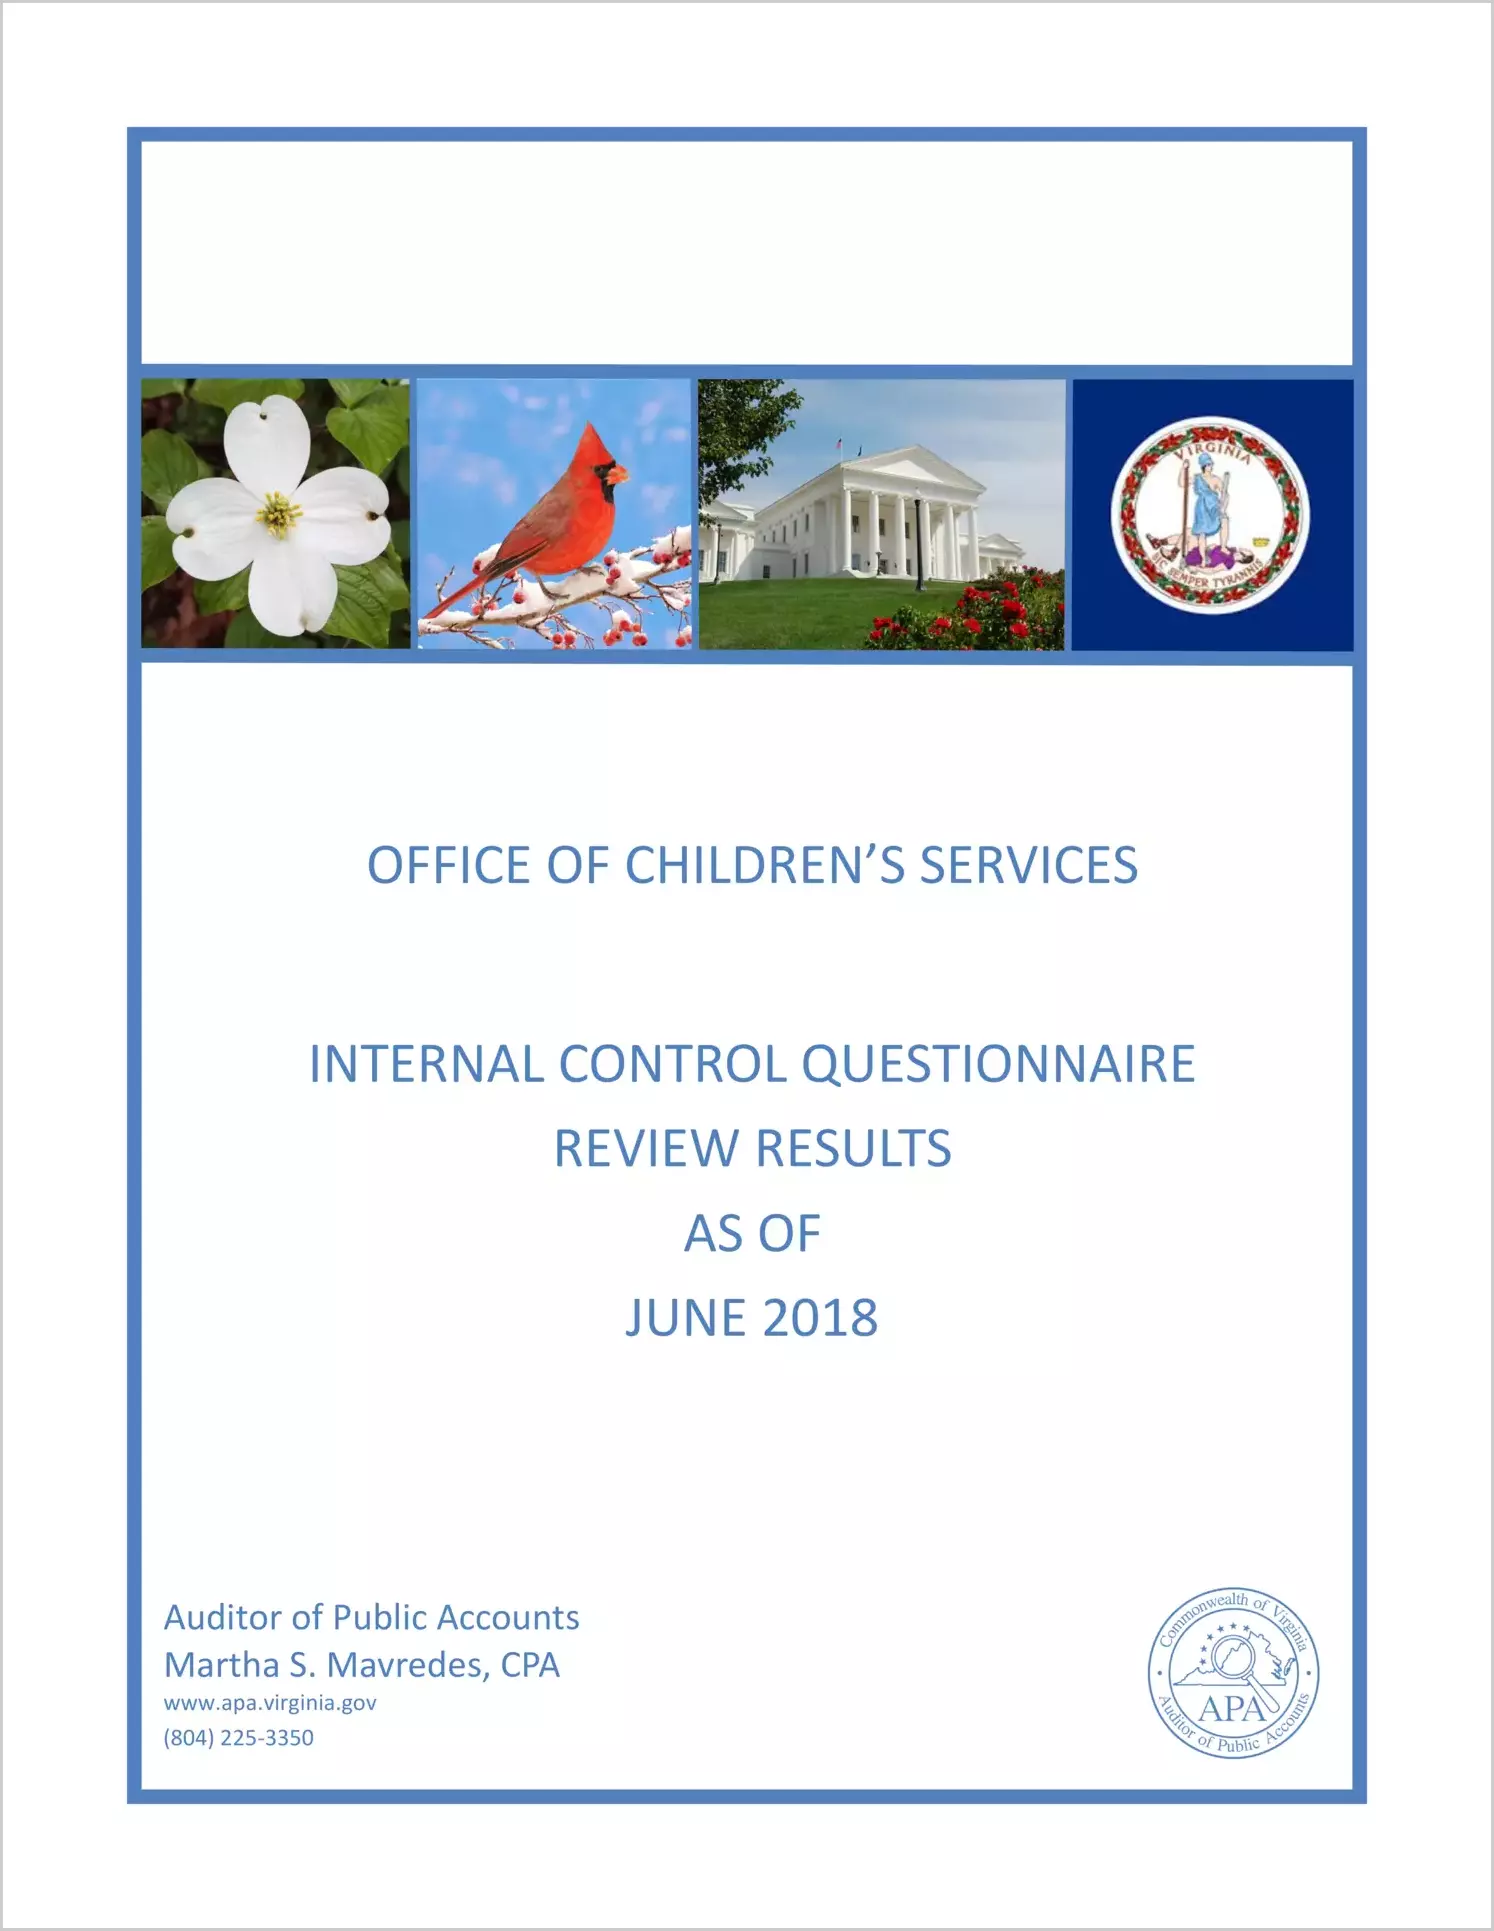 Office of Children's Services Internal Control Questionnaire Review Results as of June 2018